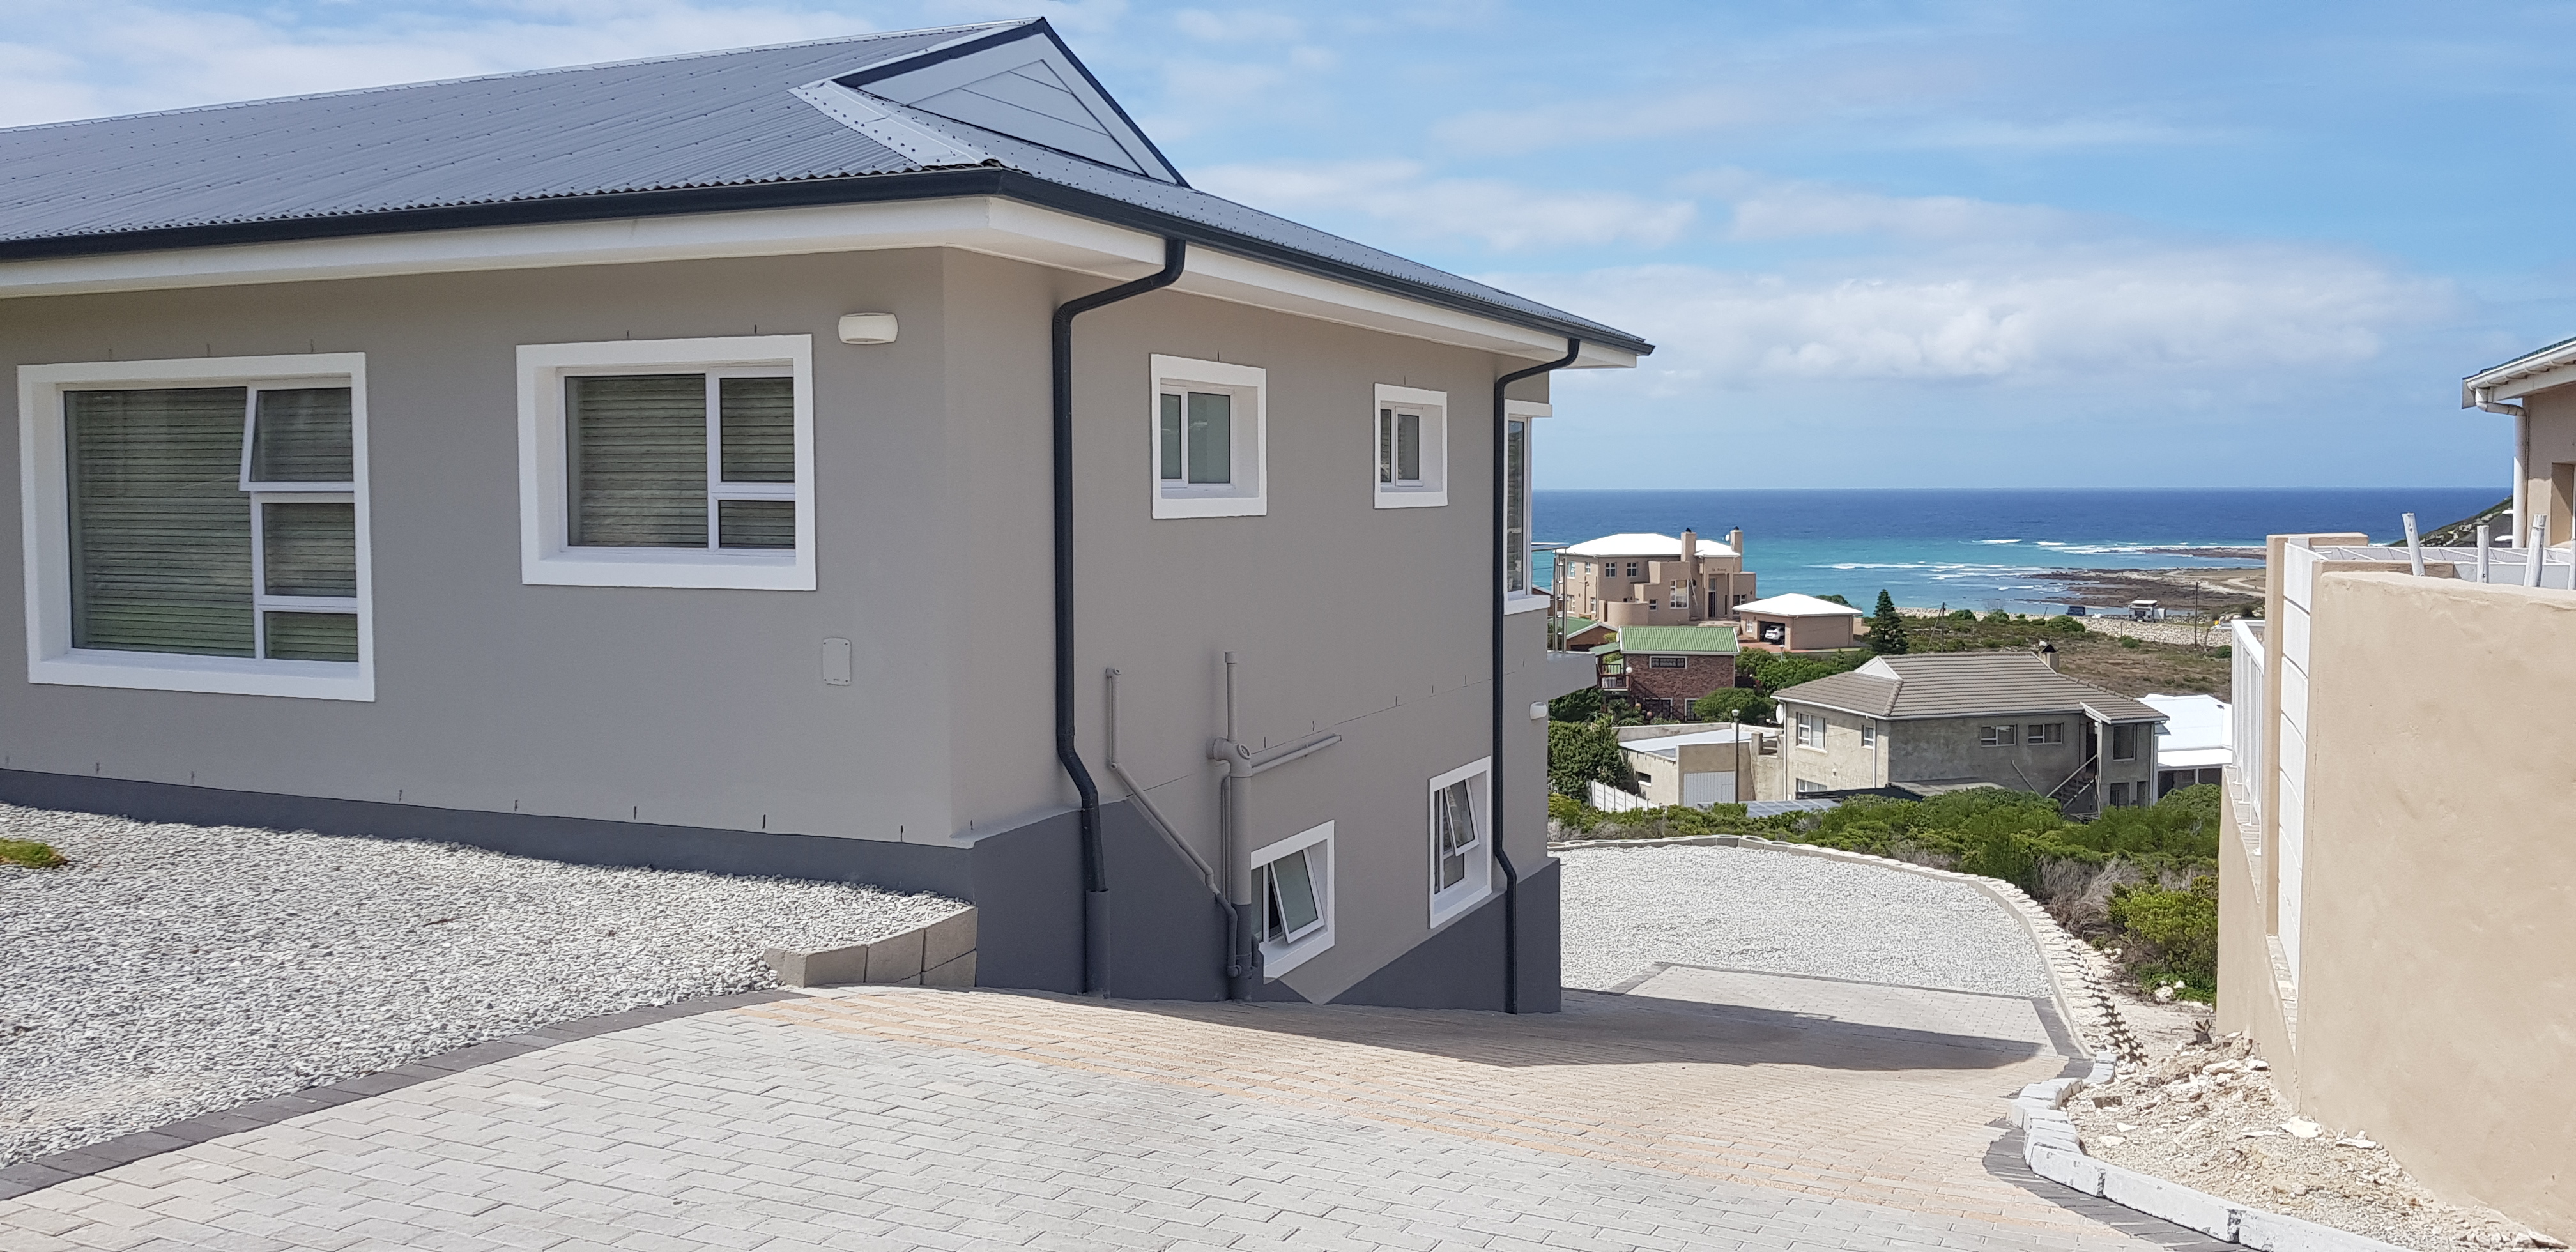 Successful Project in Cape Town